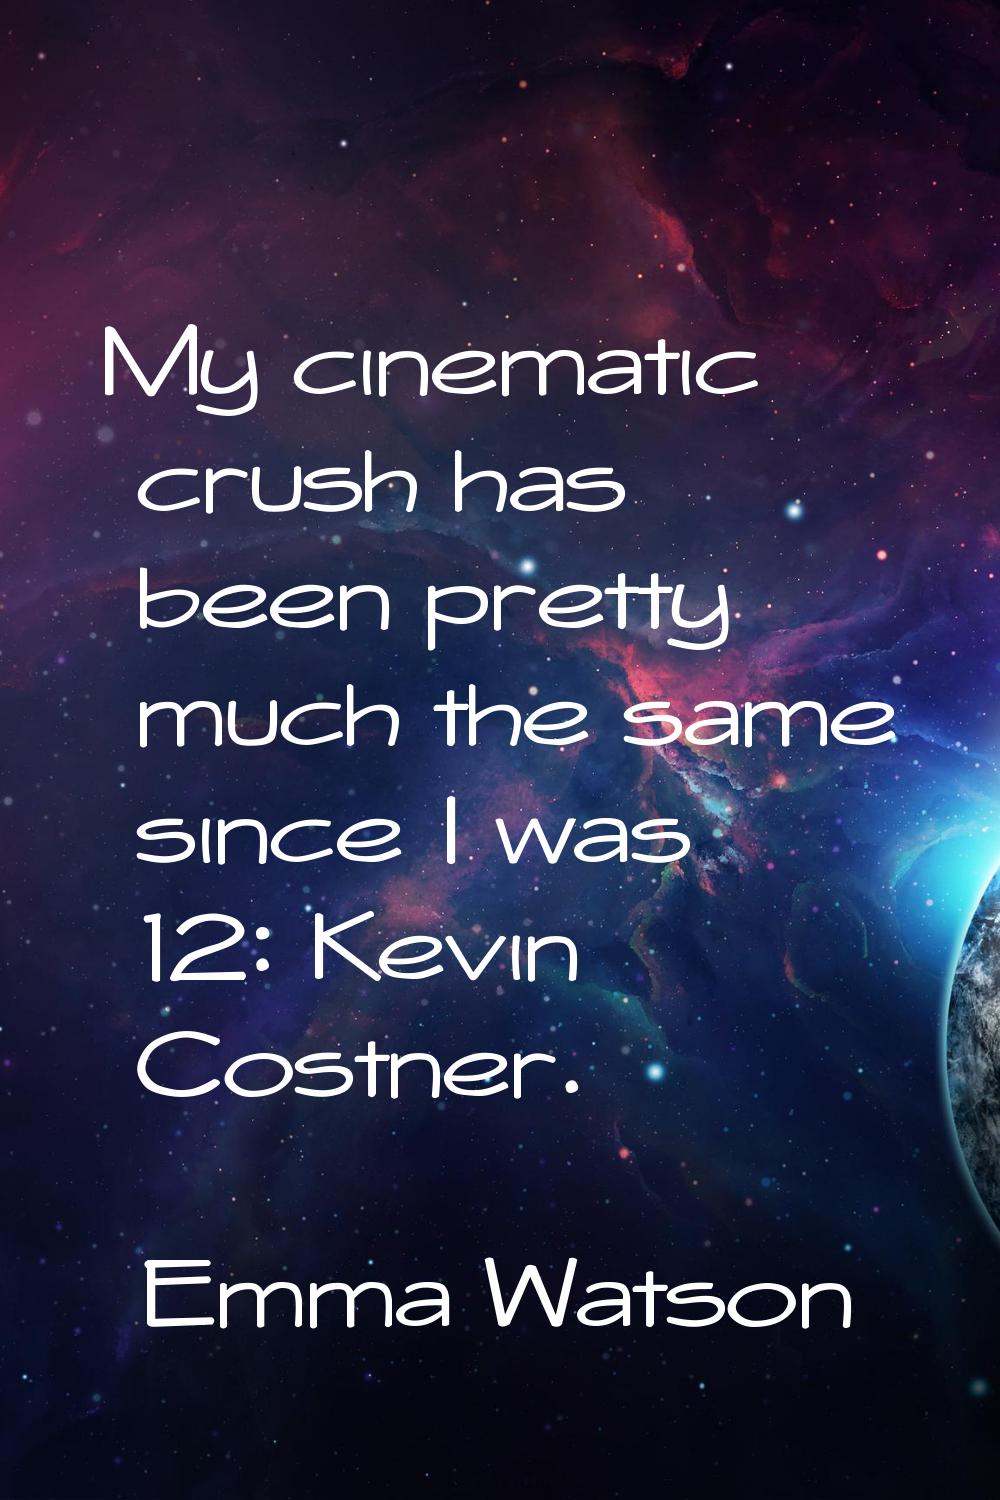 My cinematic crush has been pretty much the same since I was 12: Kevin Costner.